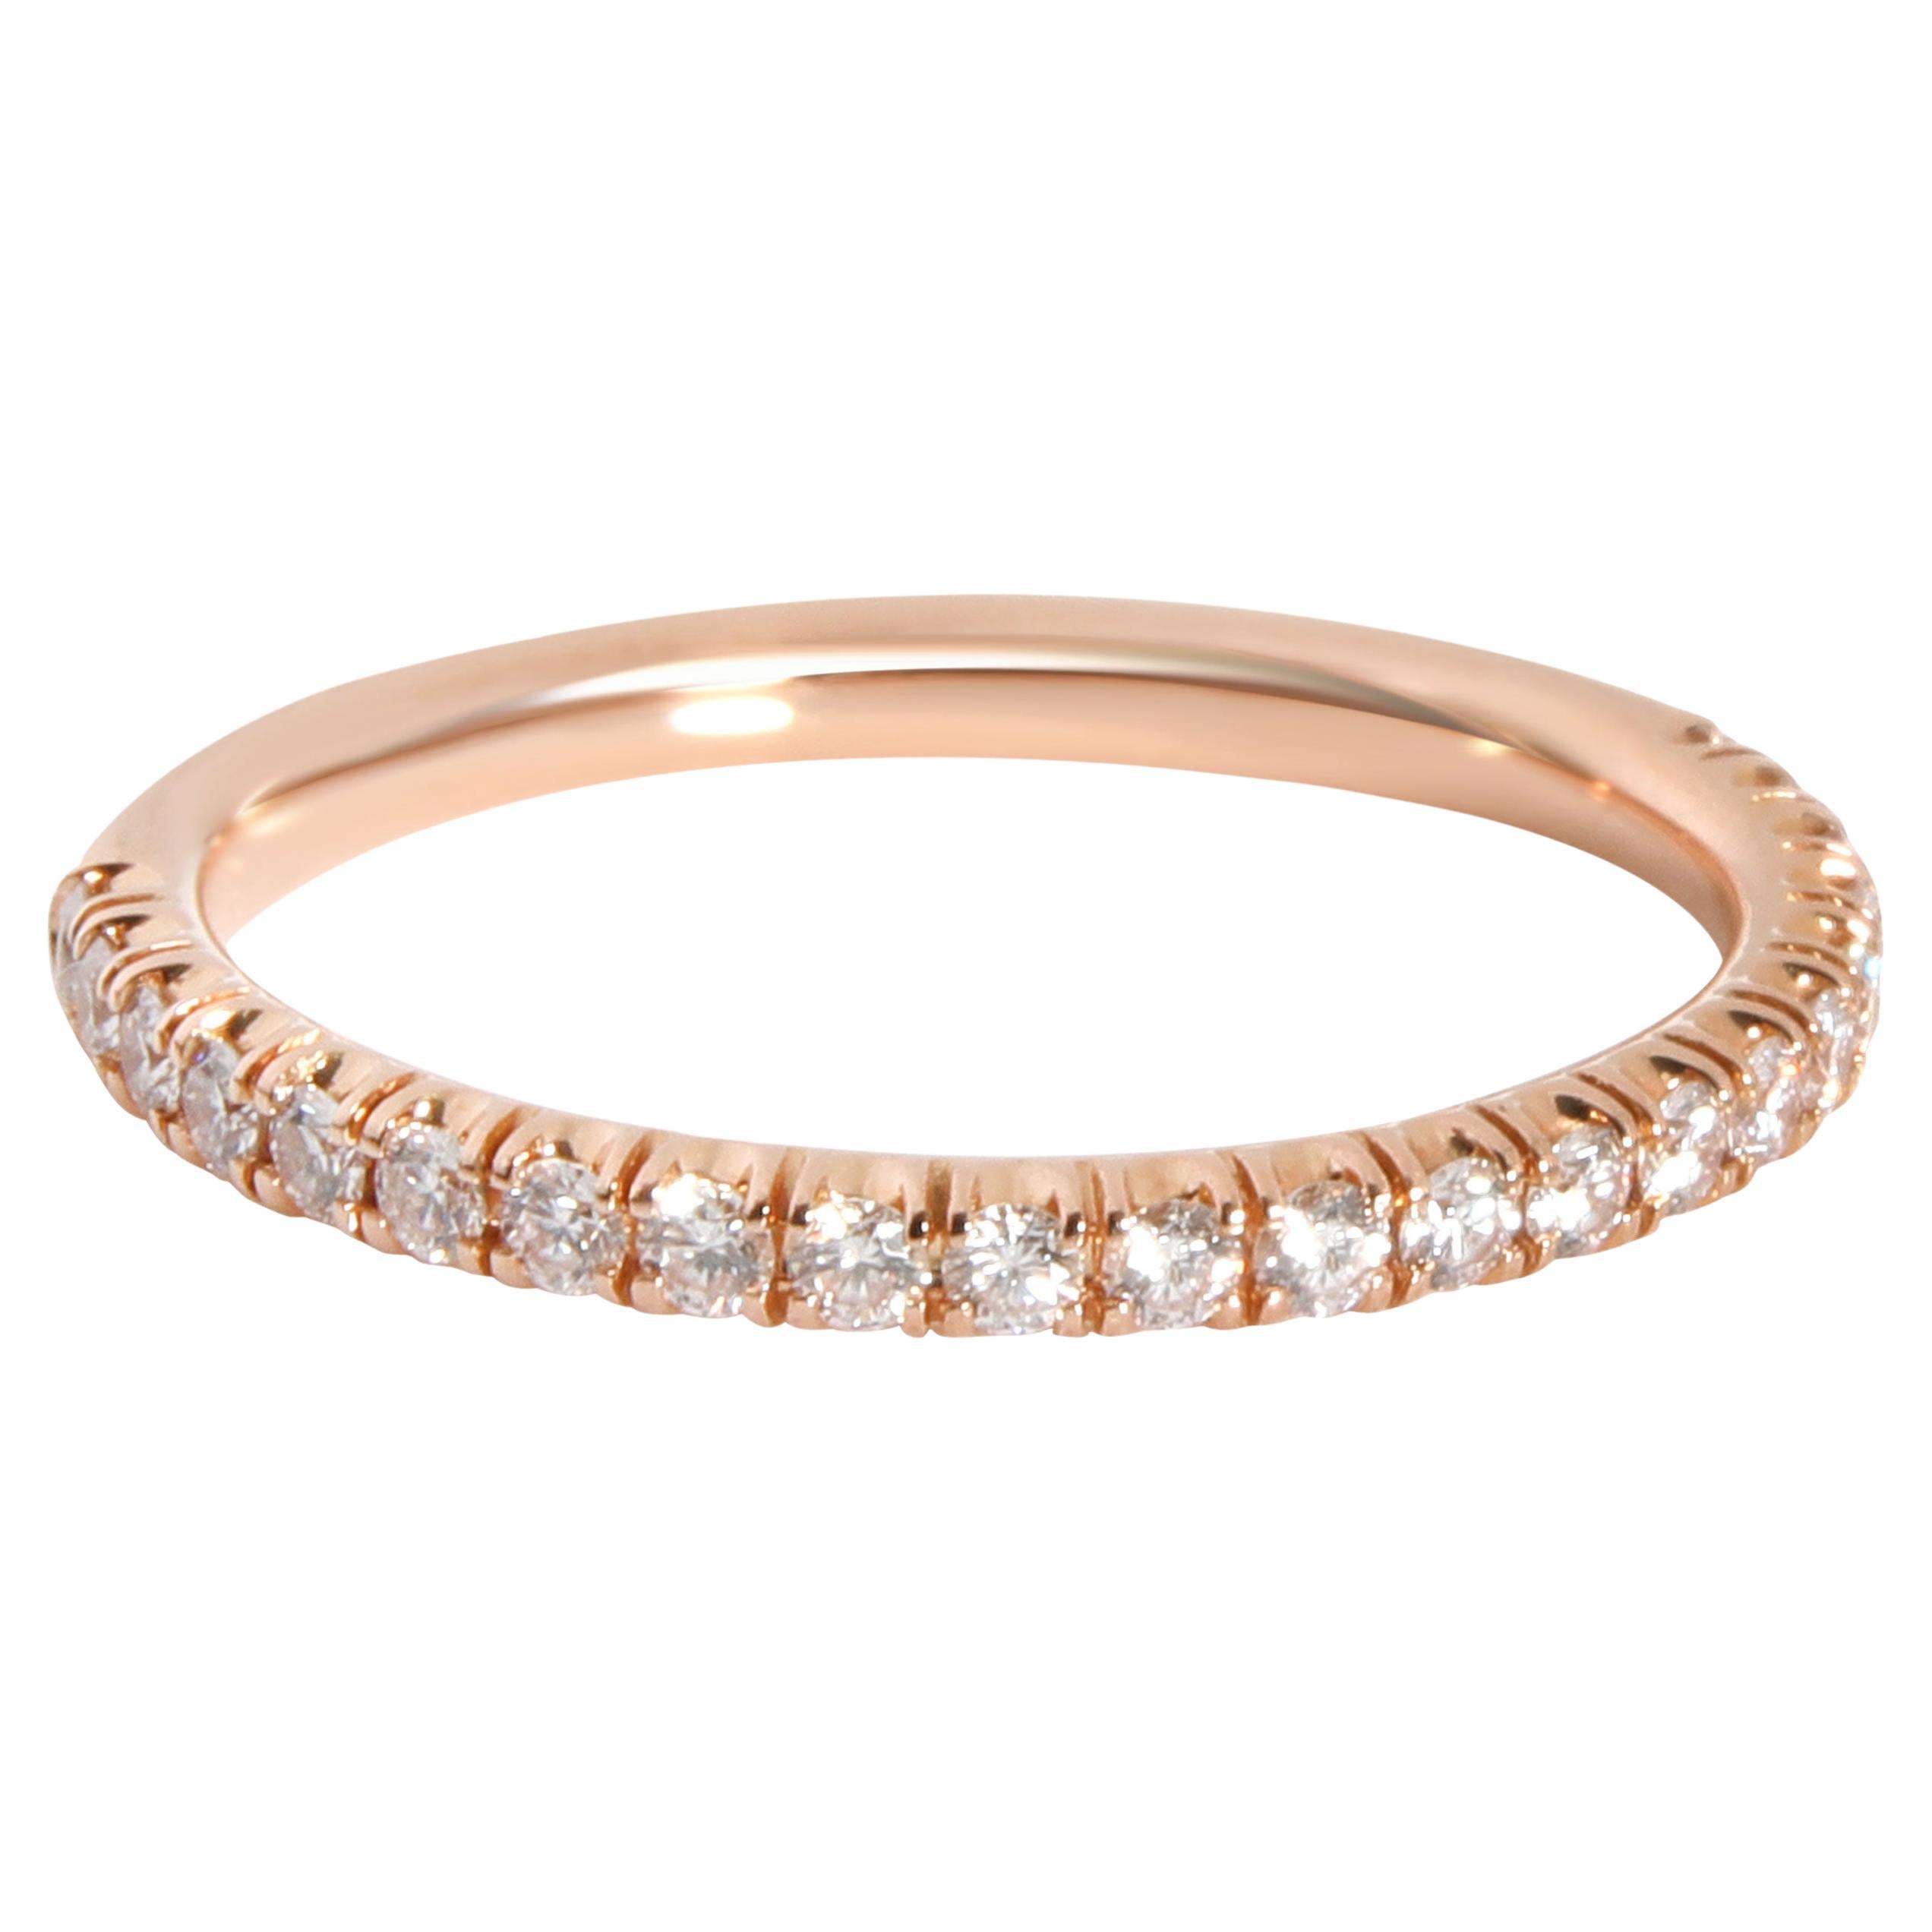 Cartier Etincelle Diamond Band in 18K Pink Gold 0.27 CTW